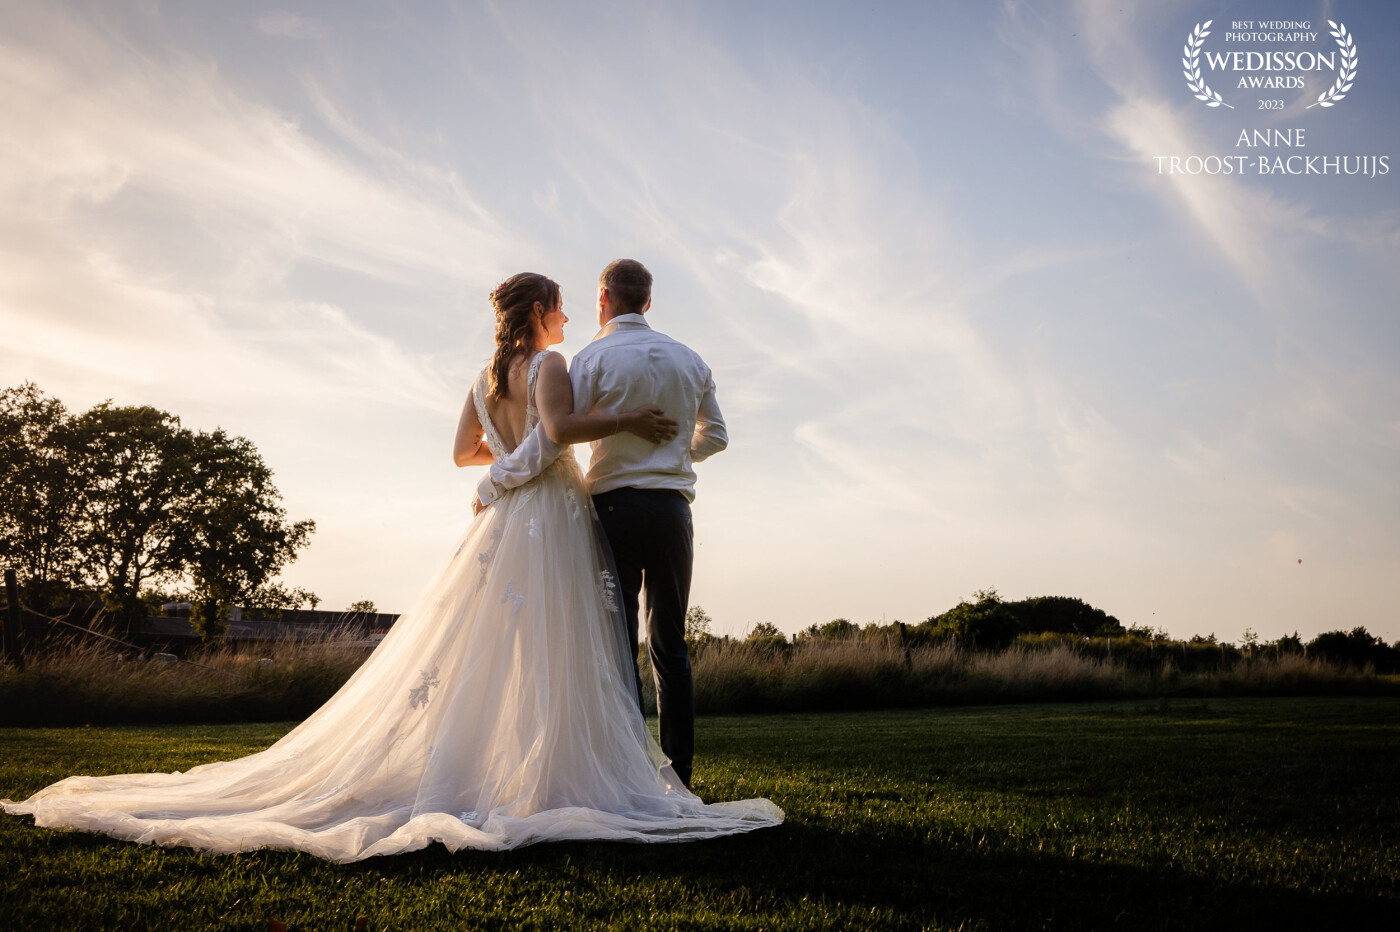 I always take the wedding couple out during golden hour. Not only because it will be beautiful photo's but also to have a relaxed moment together, to take in all that is happend on their wedding day and to enjoy all the little moments before the day will end.